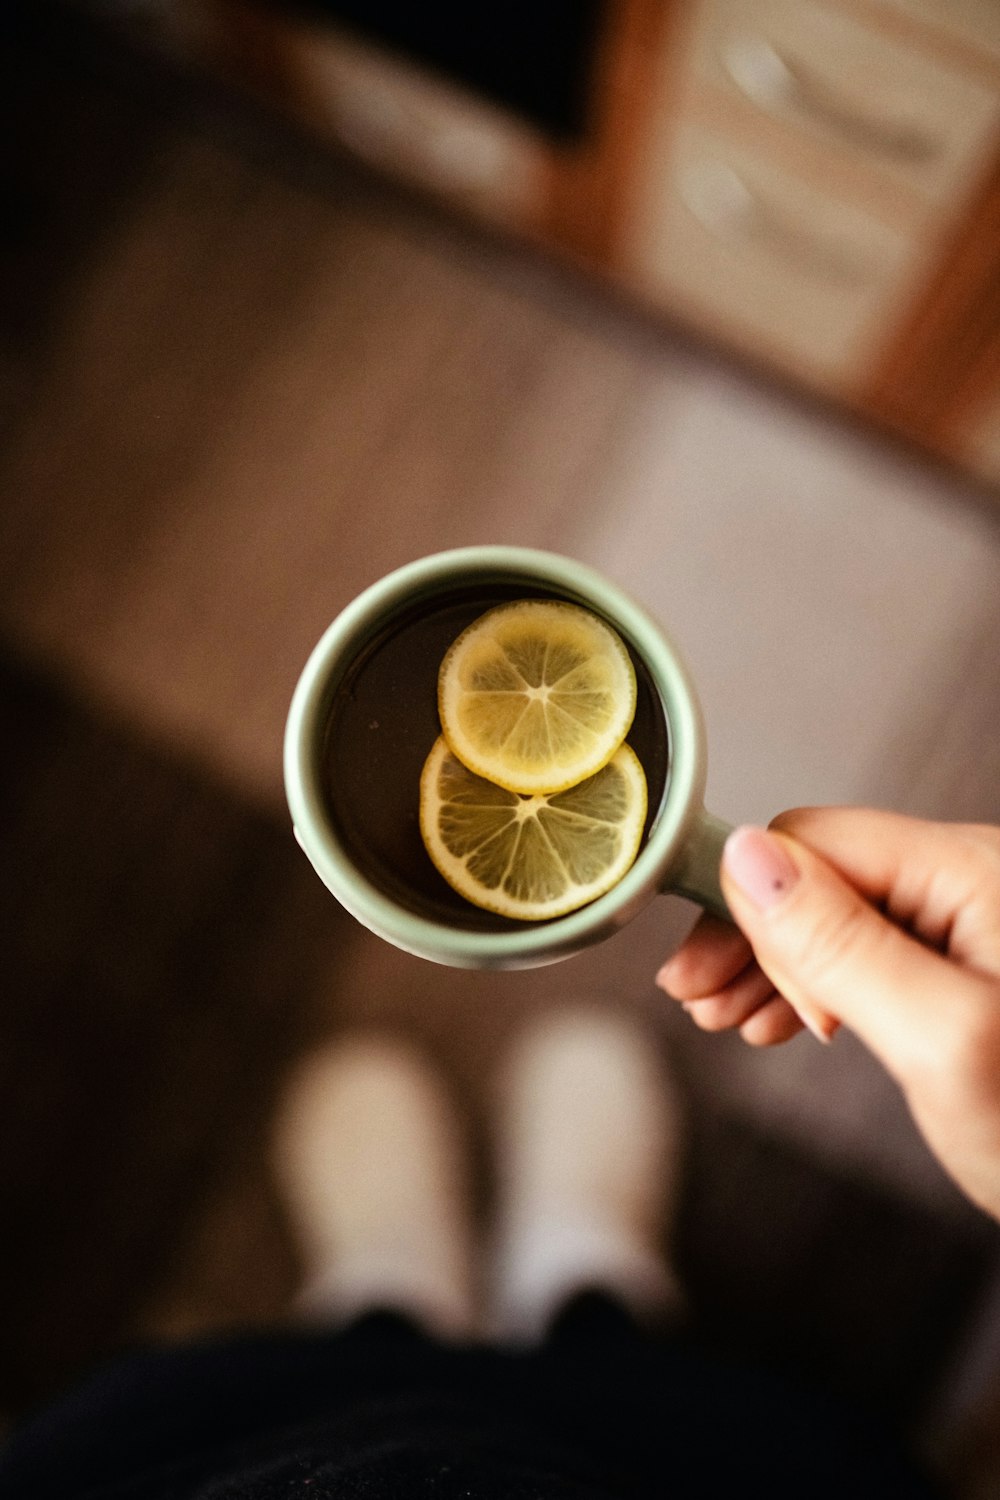 a person holding a cup of tea with lemon slices in it